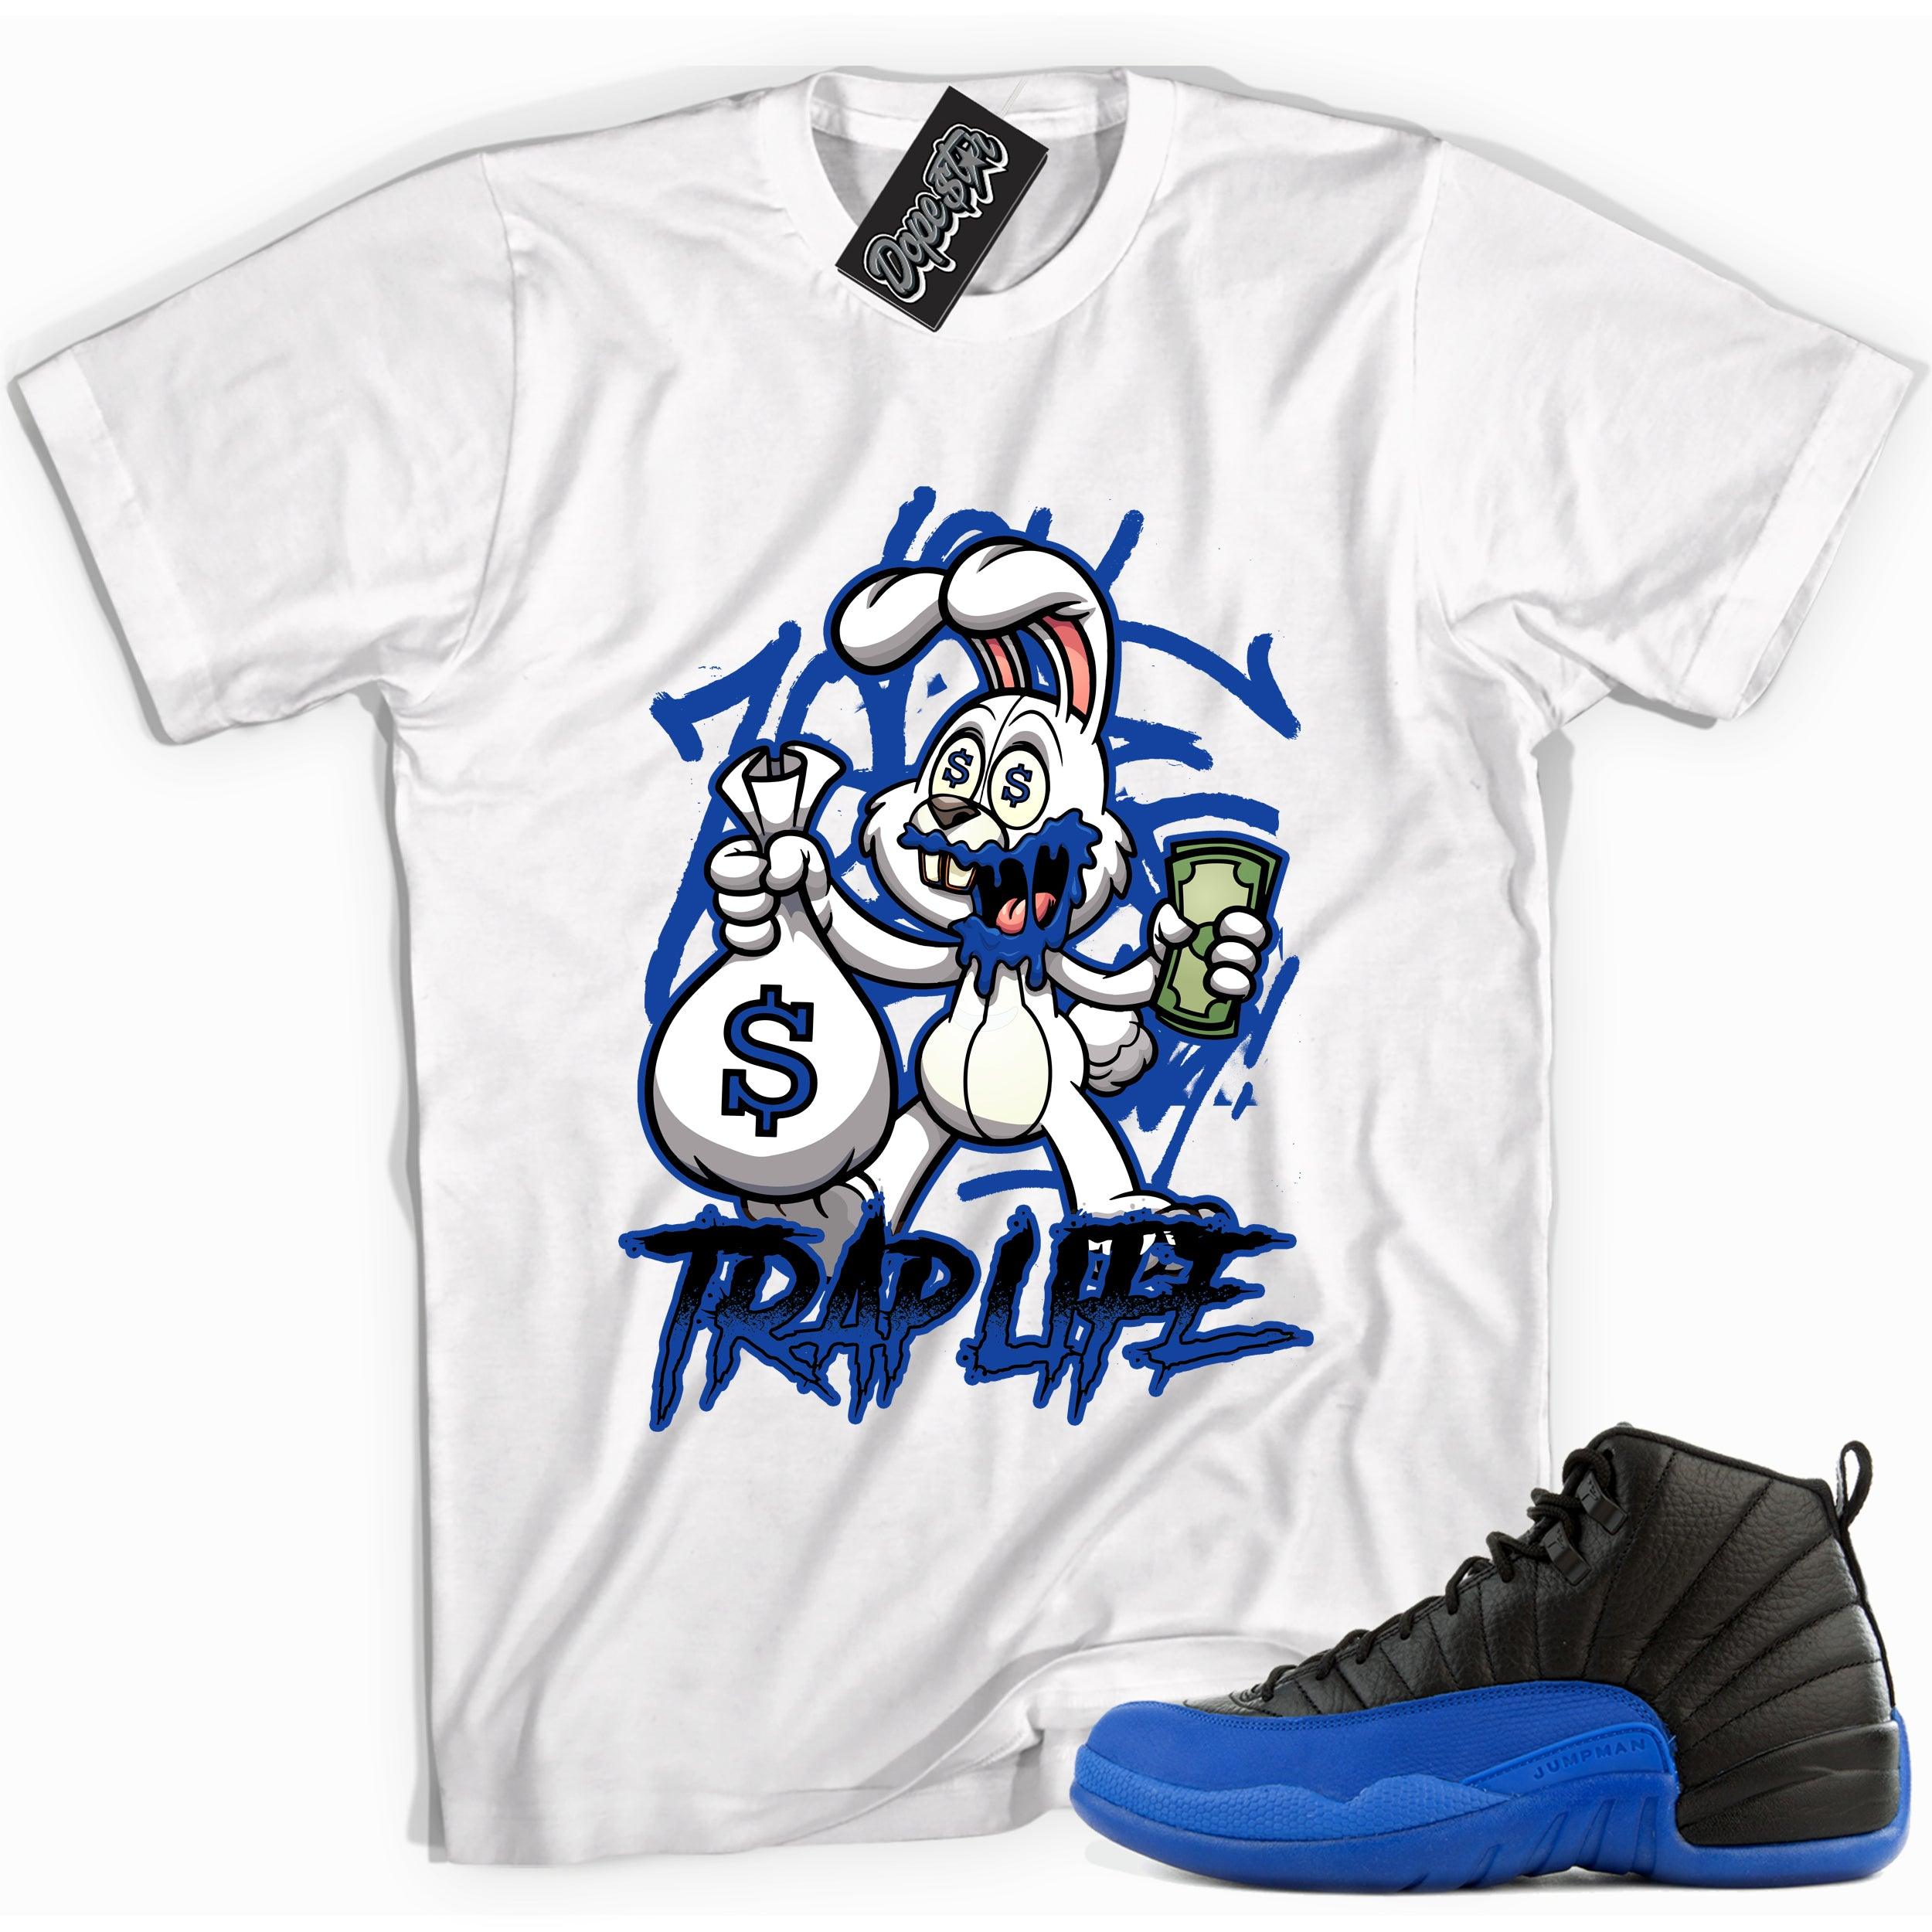 Cool white graphic tee with 'trap rabbit' print, that perfectly matches Air Jordan 12 Retro Black Game Royal sneakers.